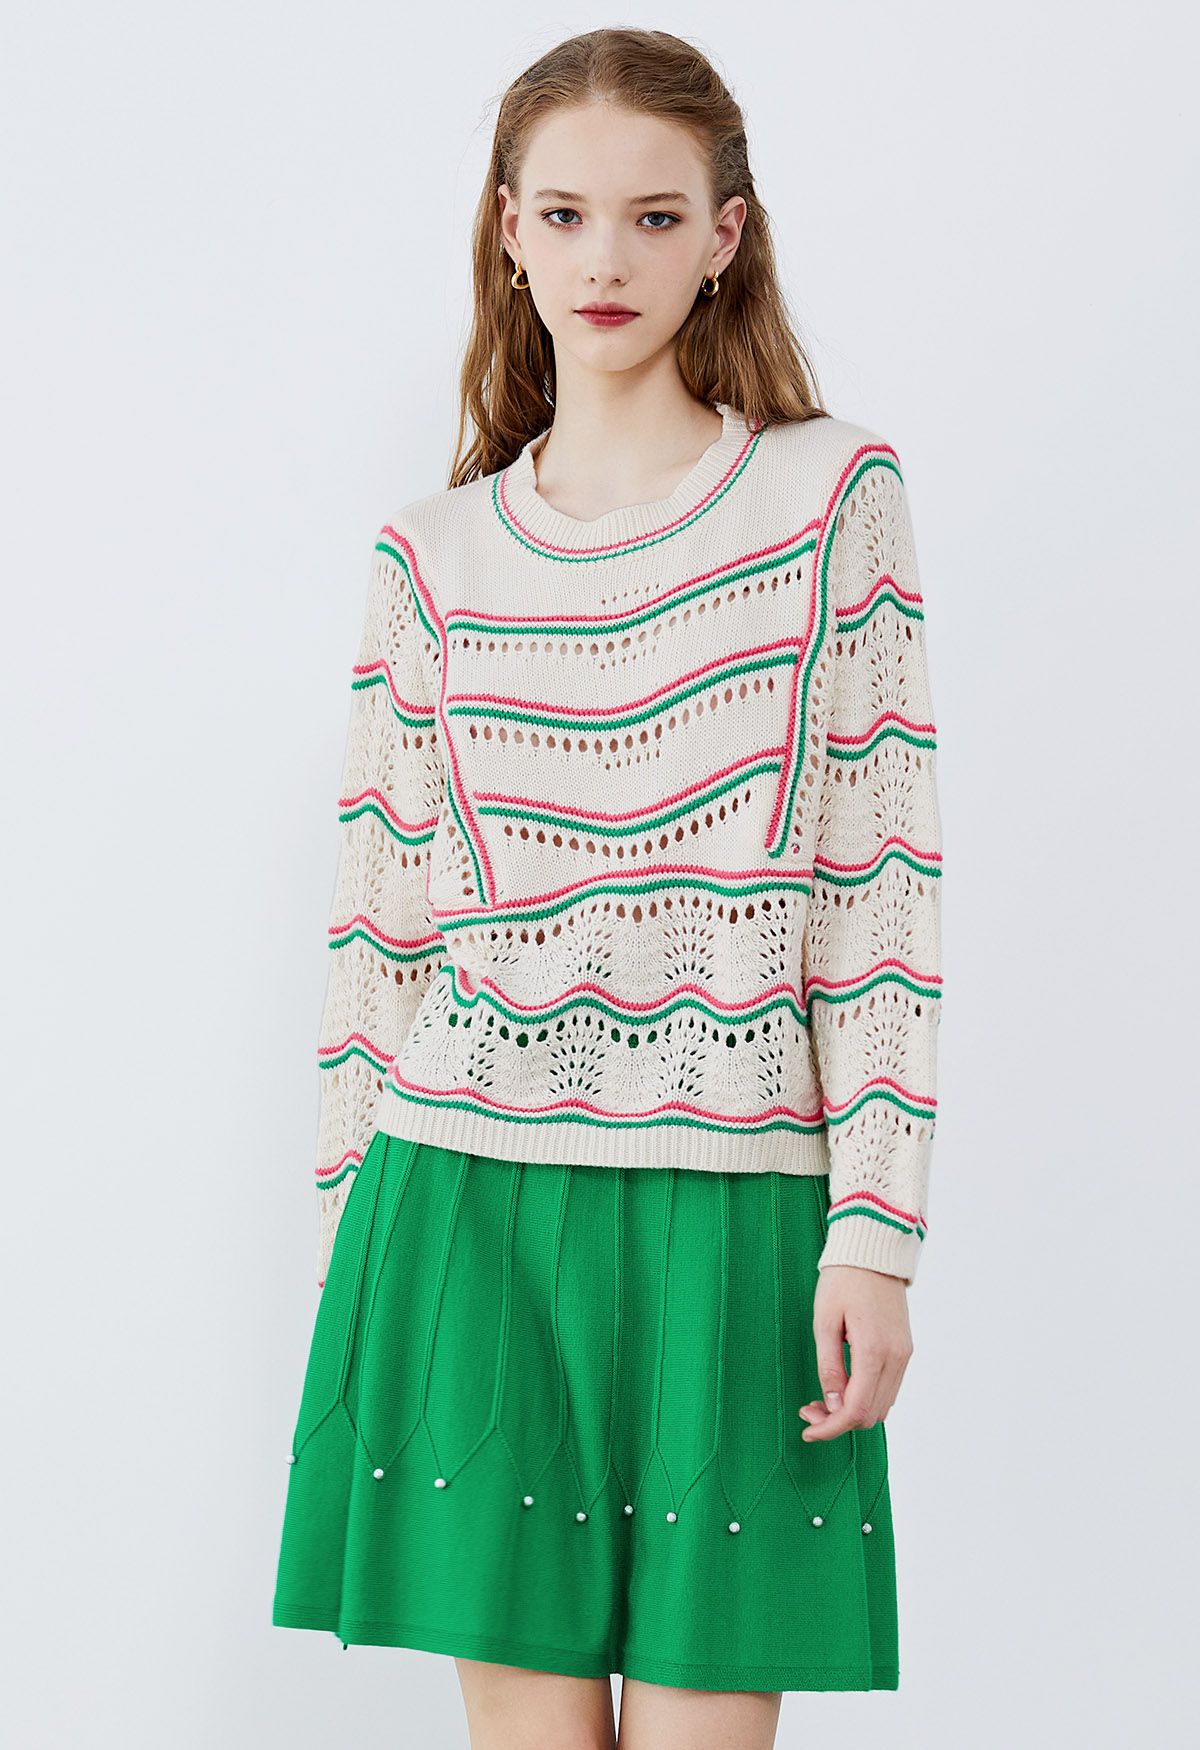 Contrast Wavy Line Openwork Knit Sweater - Retro, Indie and Unique